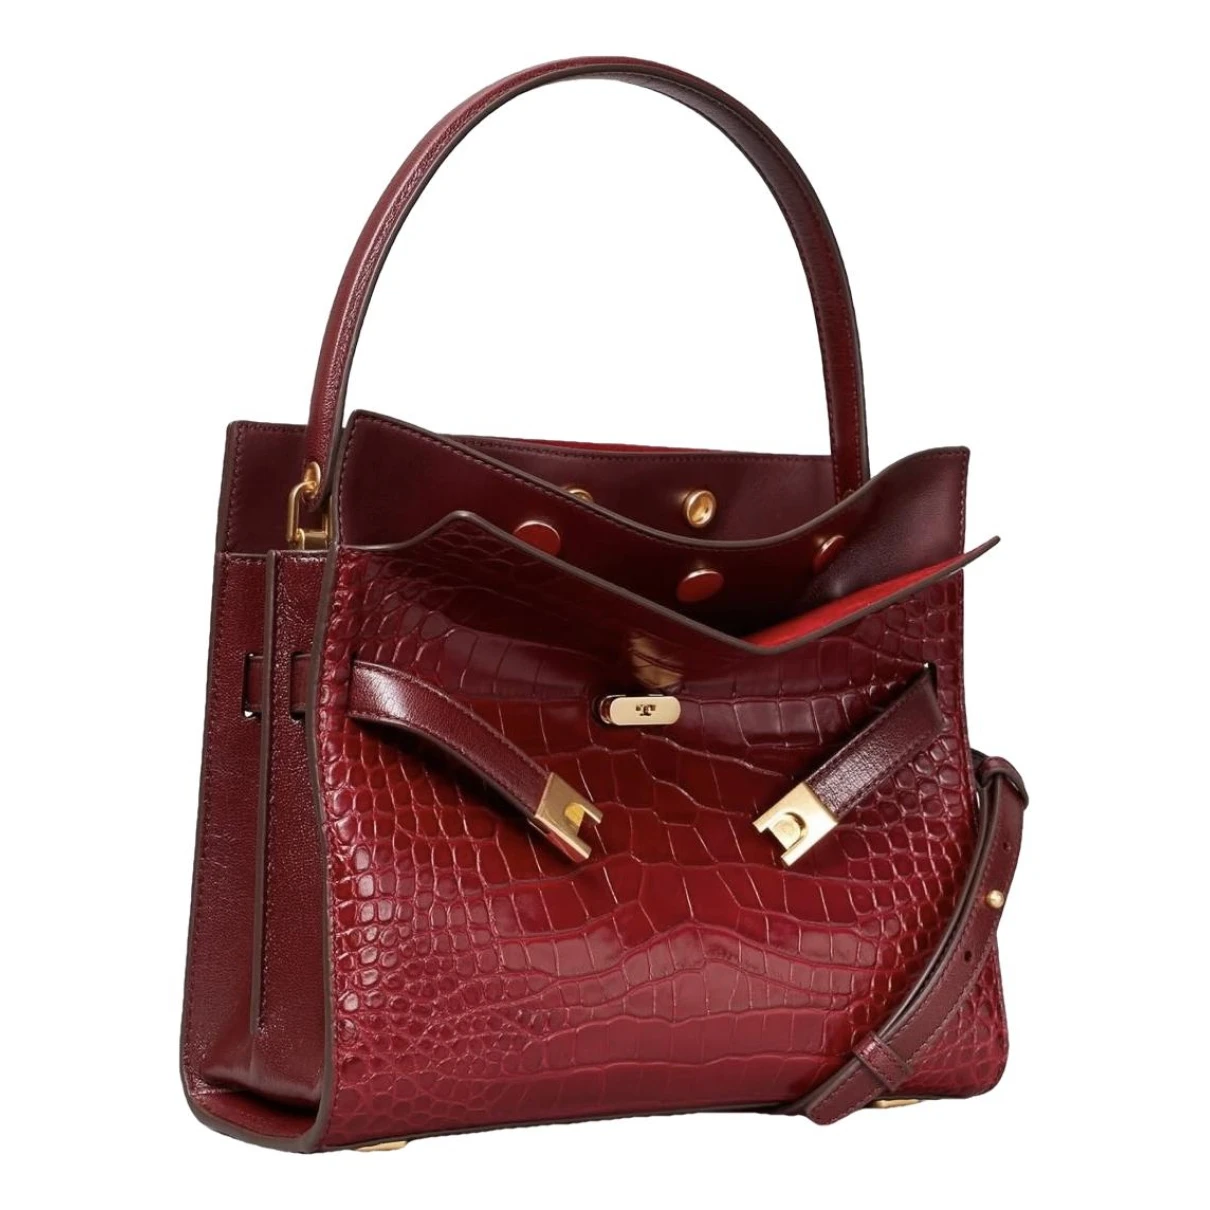 Pre-owned Tory Burch Lee Radziwill Petite Leather Handbag In Burgundy